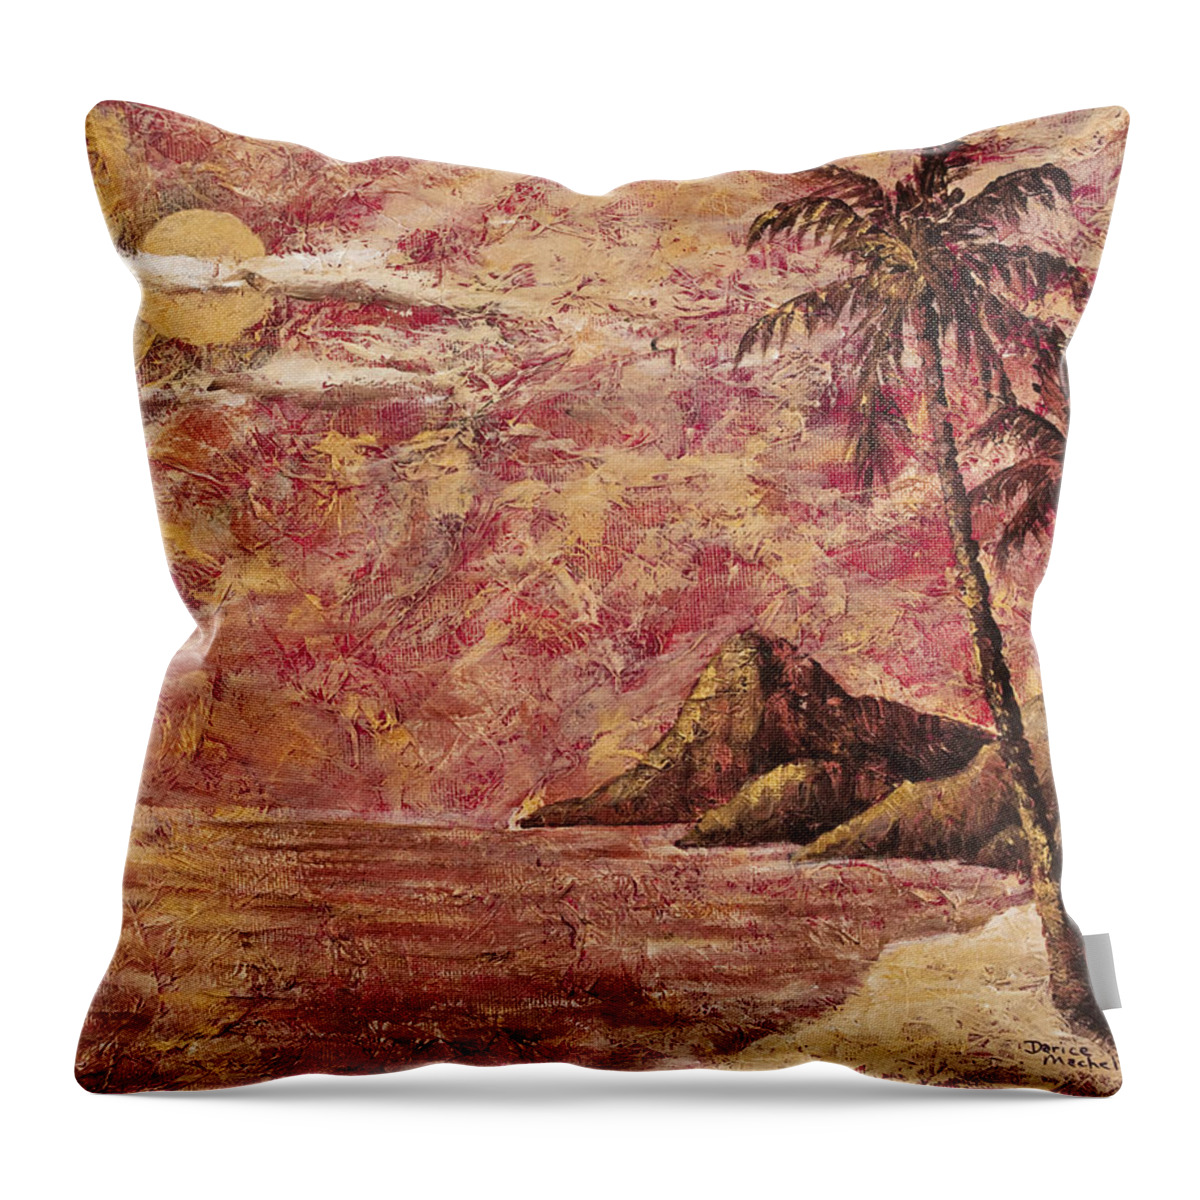 Landscape Throw Pillow featuring the painting Golden Tropical Sunset by Darice Machel McGuire